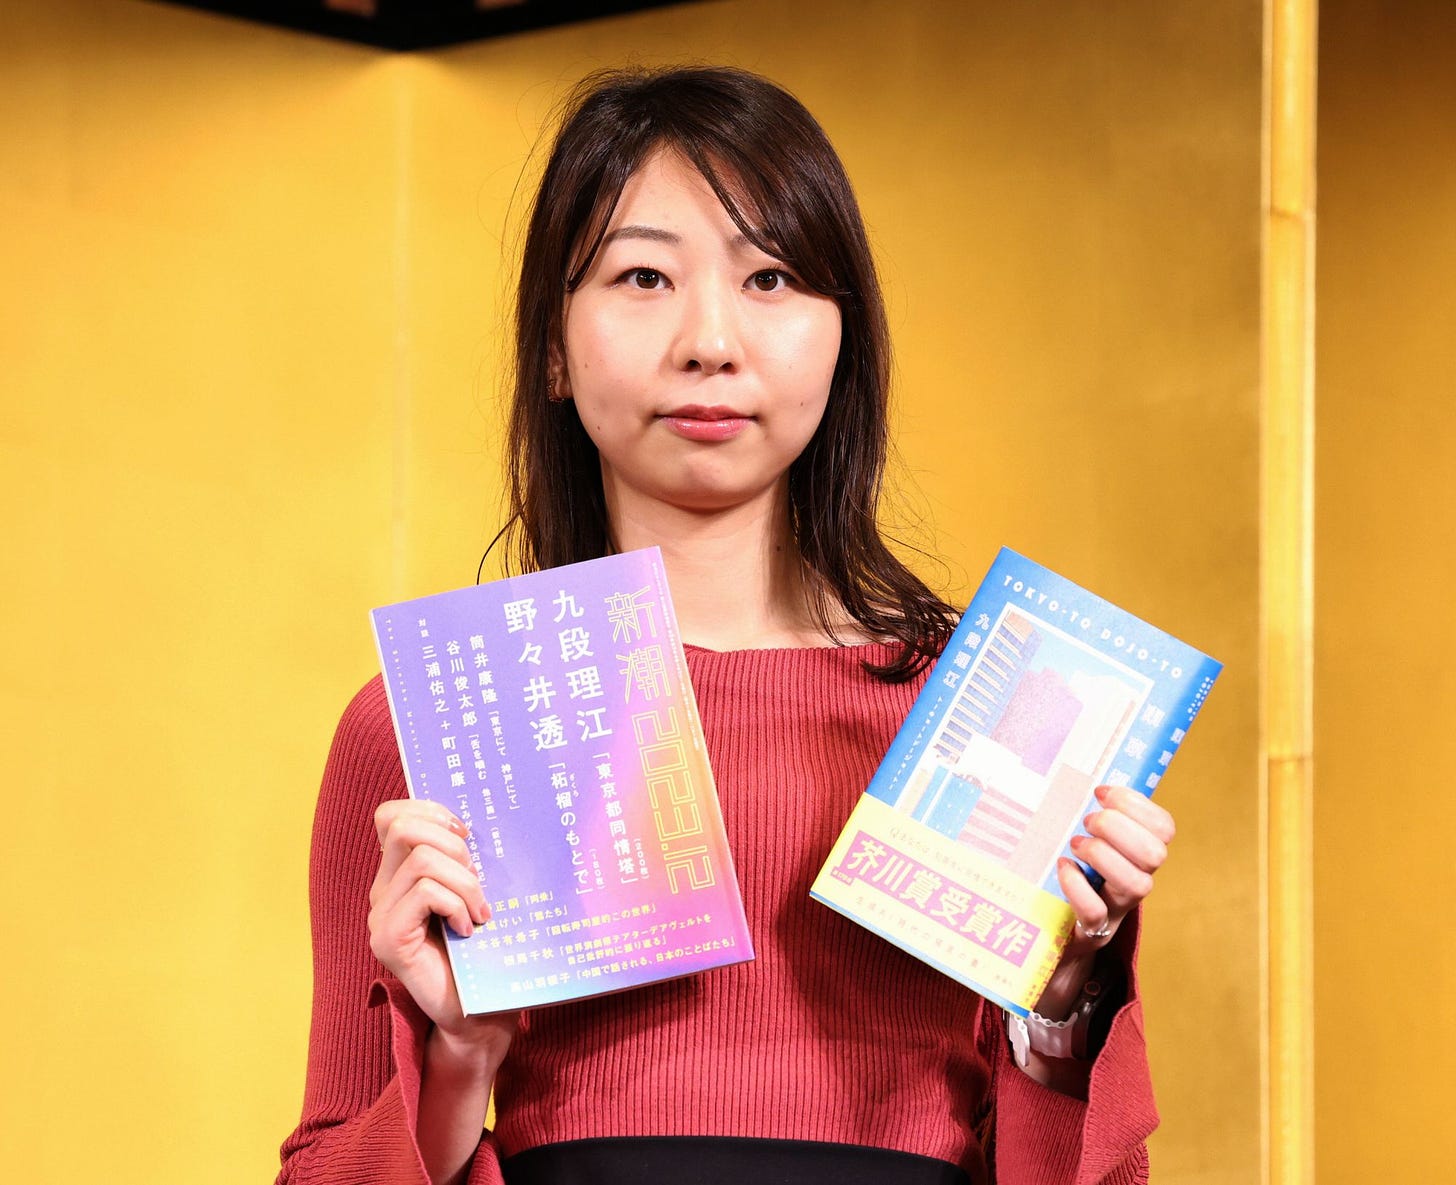 170th Akutagawa Prize winner Rie Kudan attends the press conference on January 17, 2024 in Tokyo, Japan.